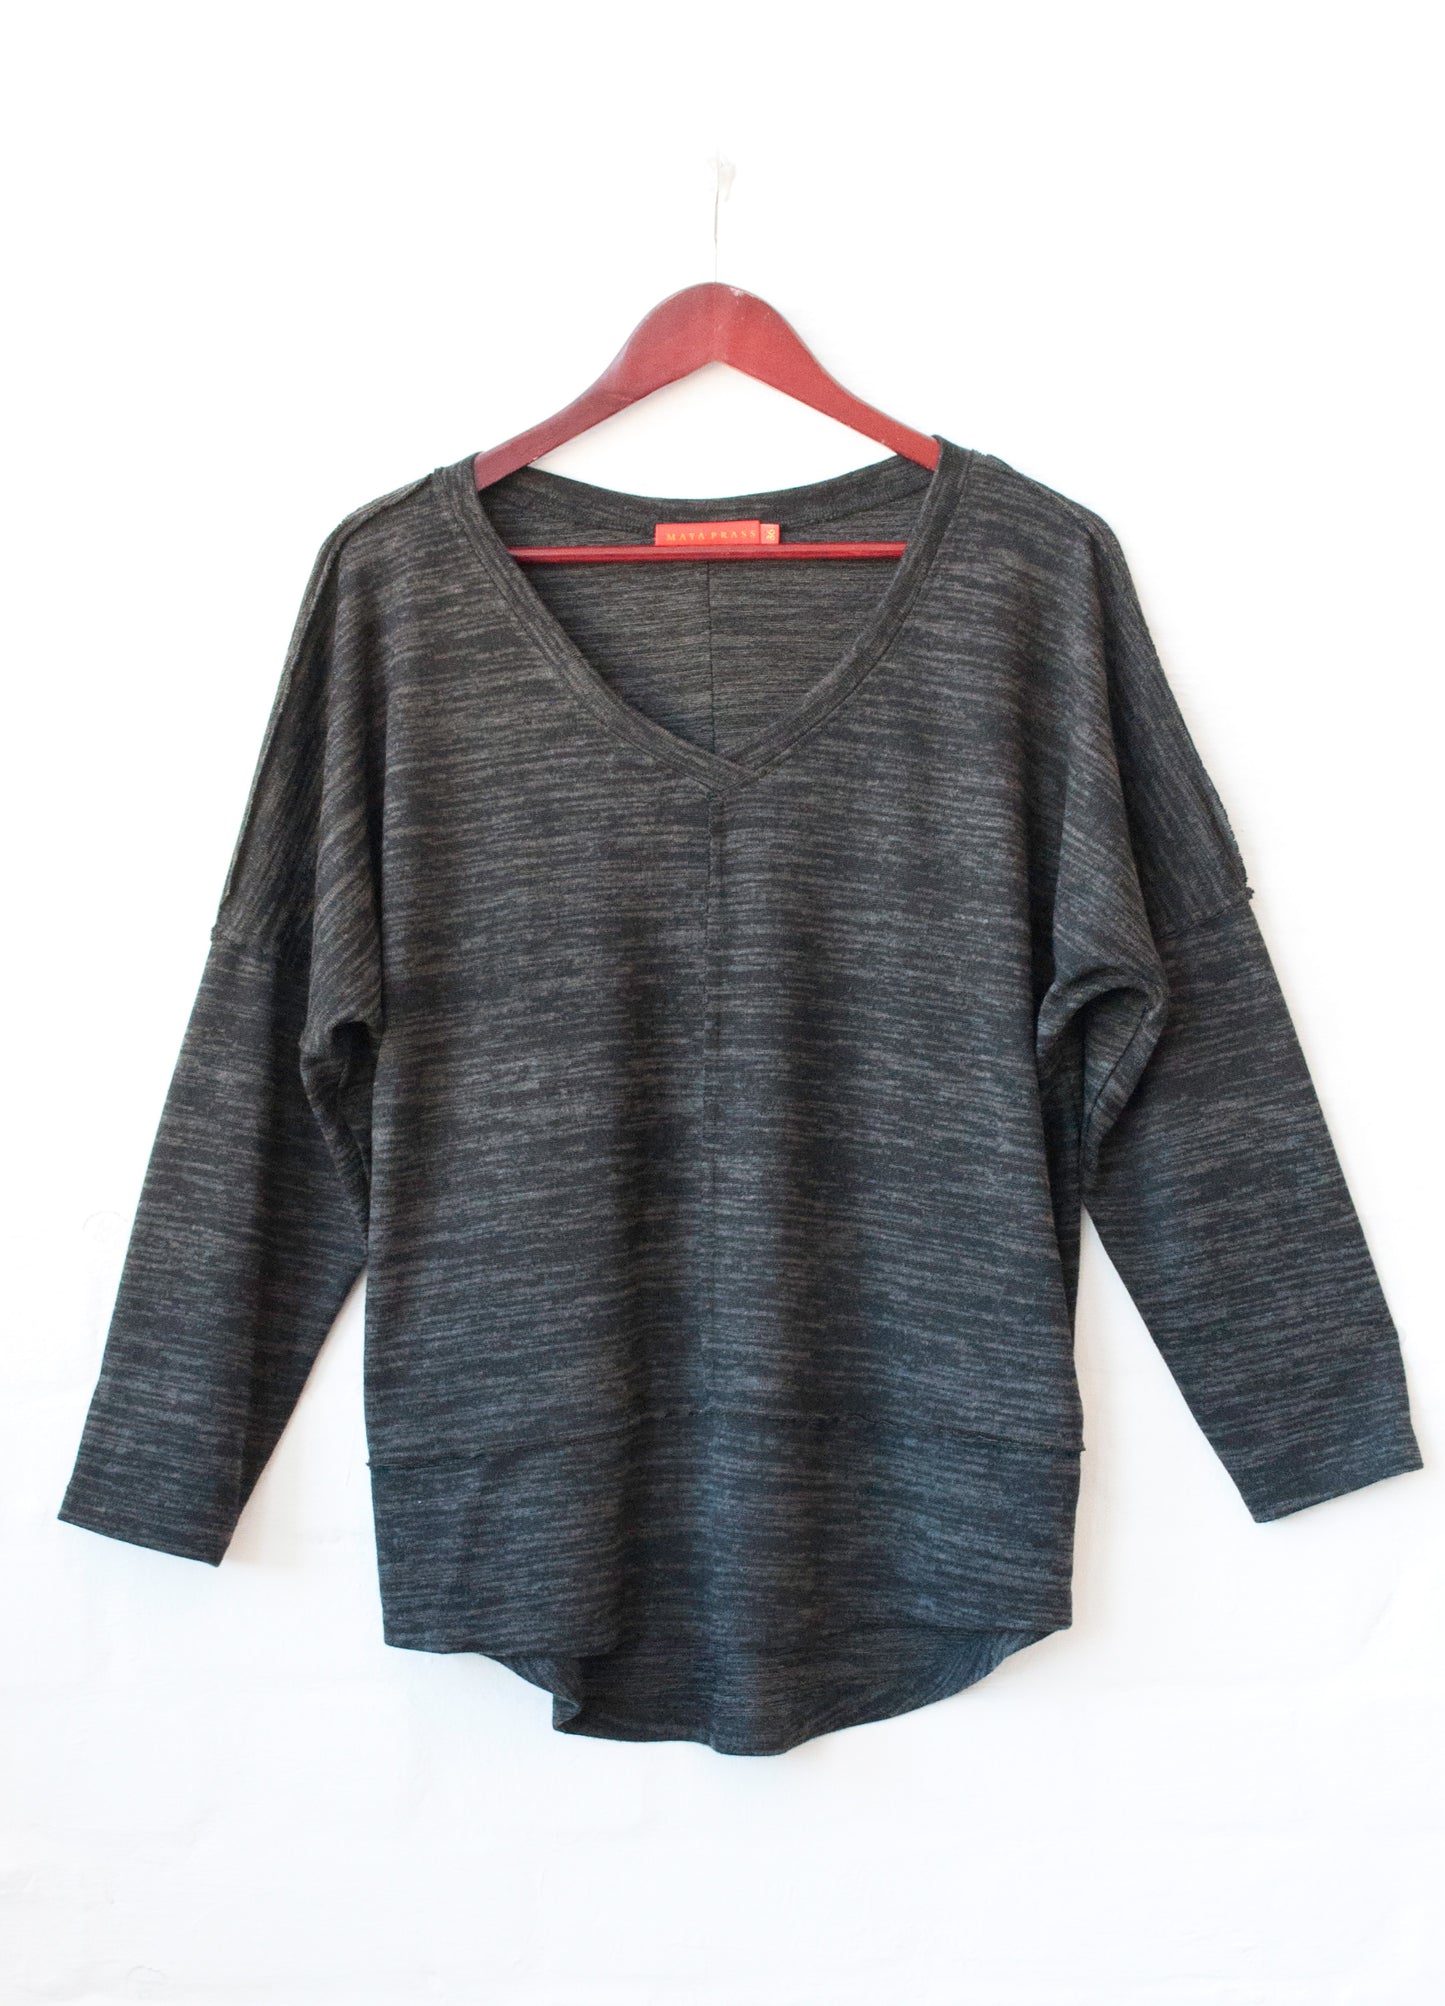 Mia Box Pullover in Charcoal melange cut & sew knit 34-38